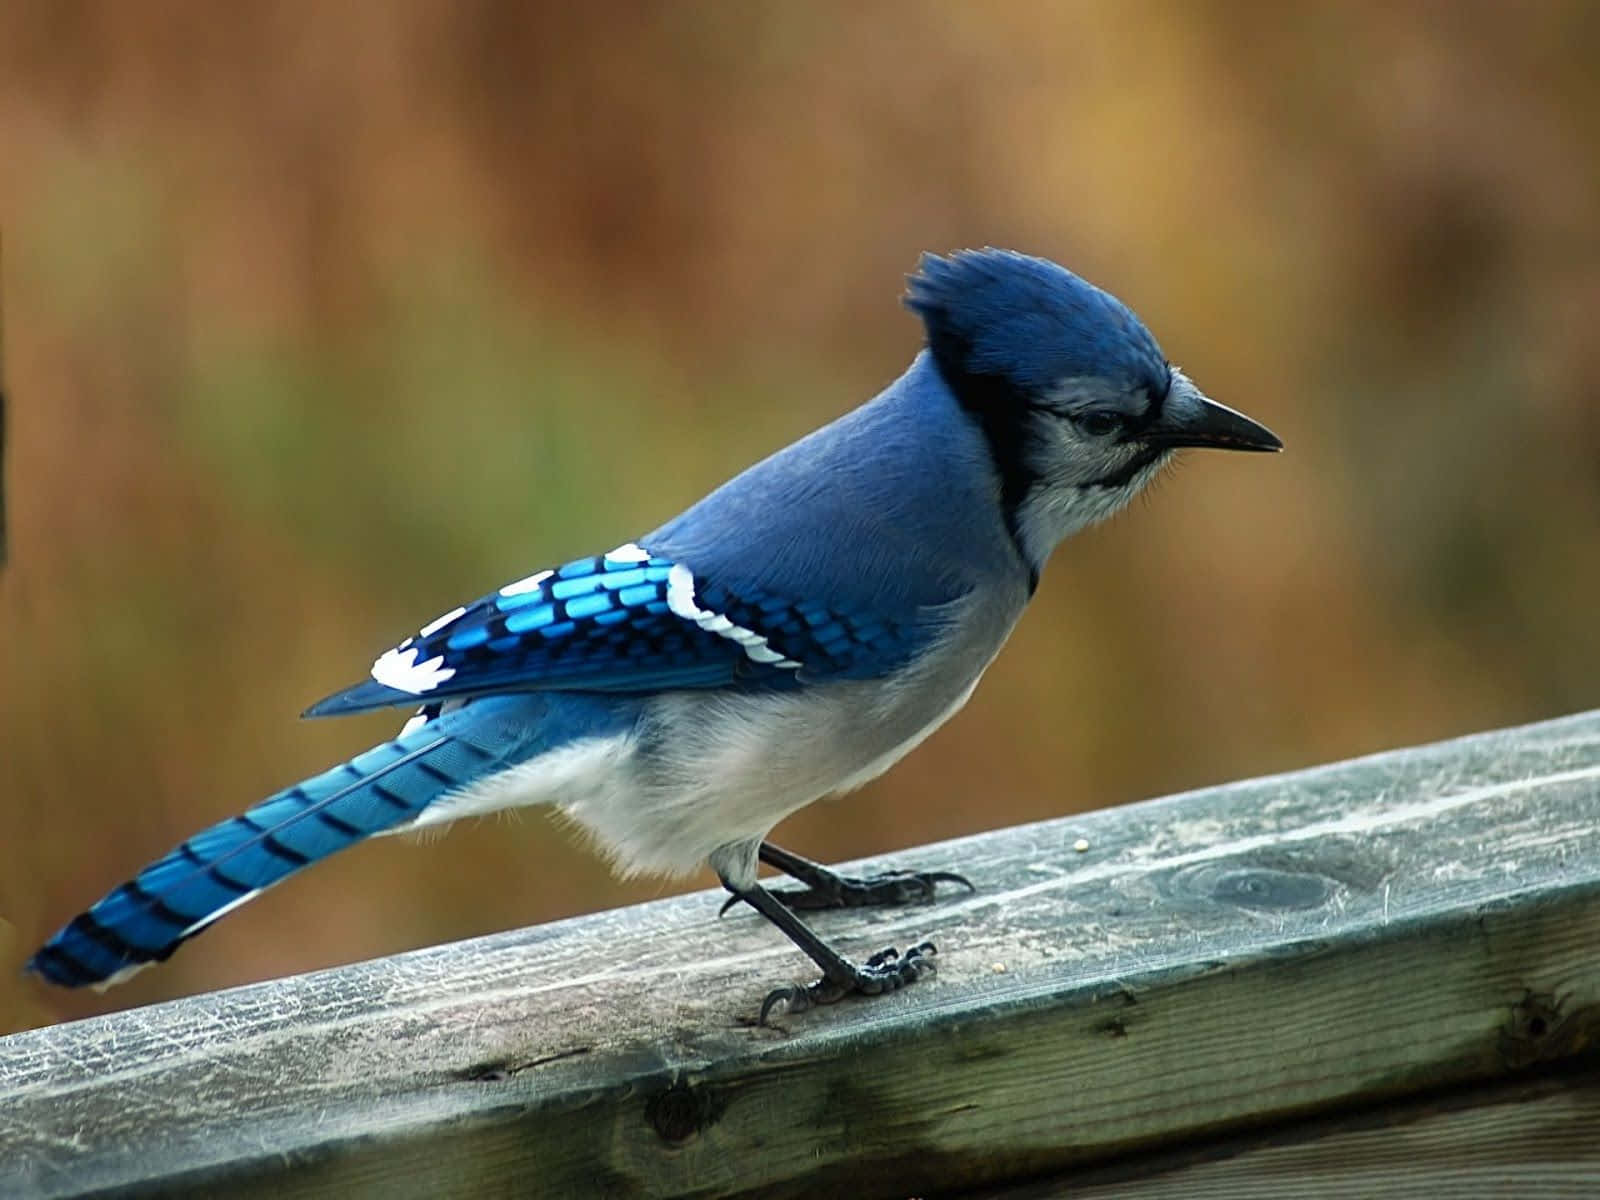 A stunning blue jay perched proudly in a tree